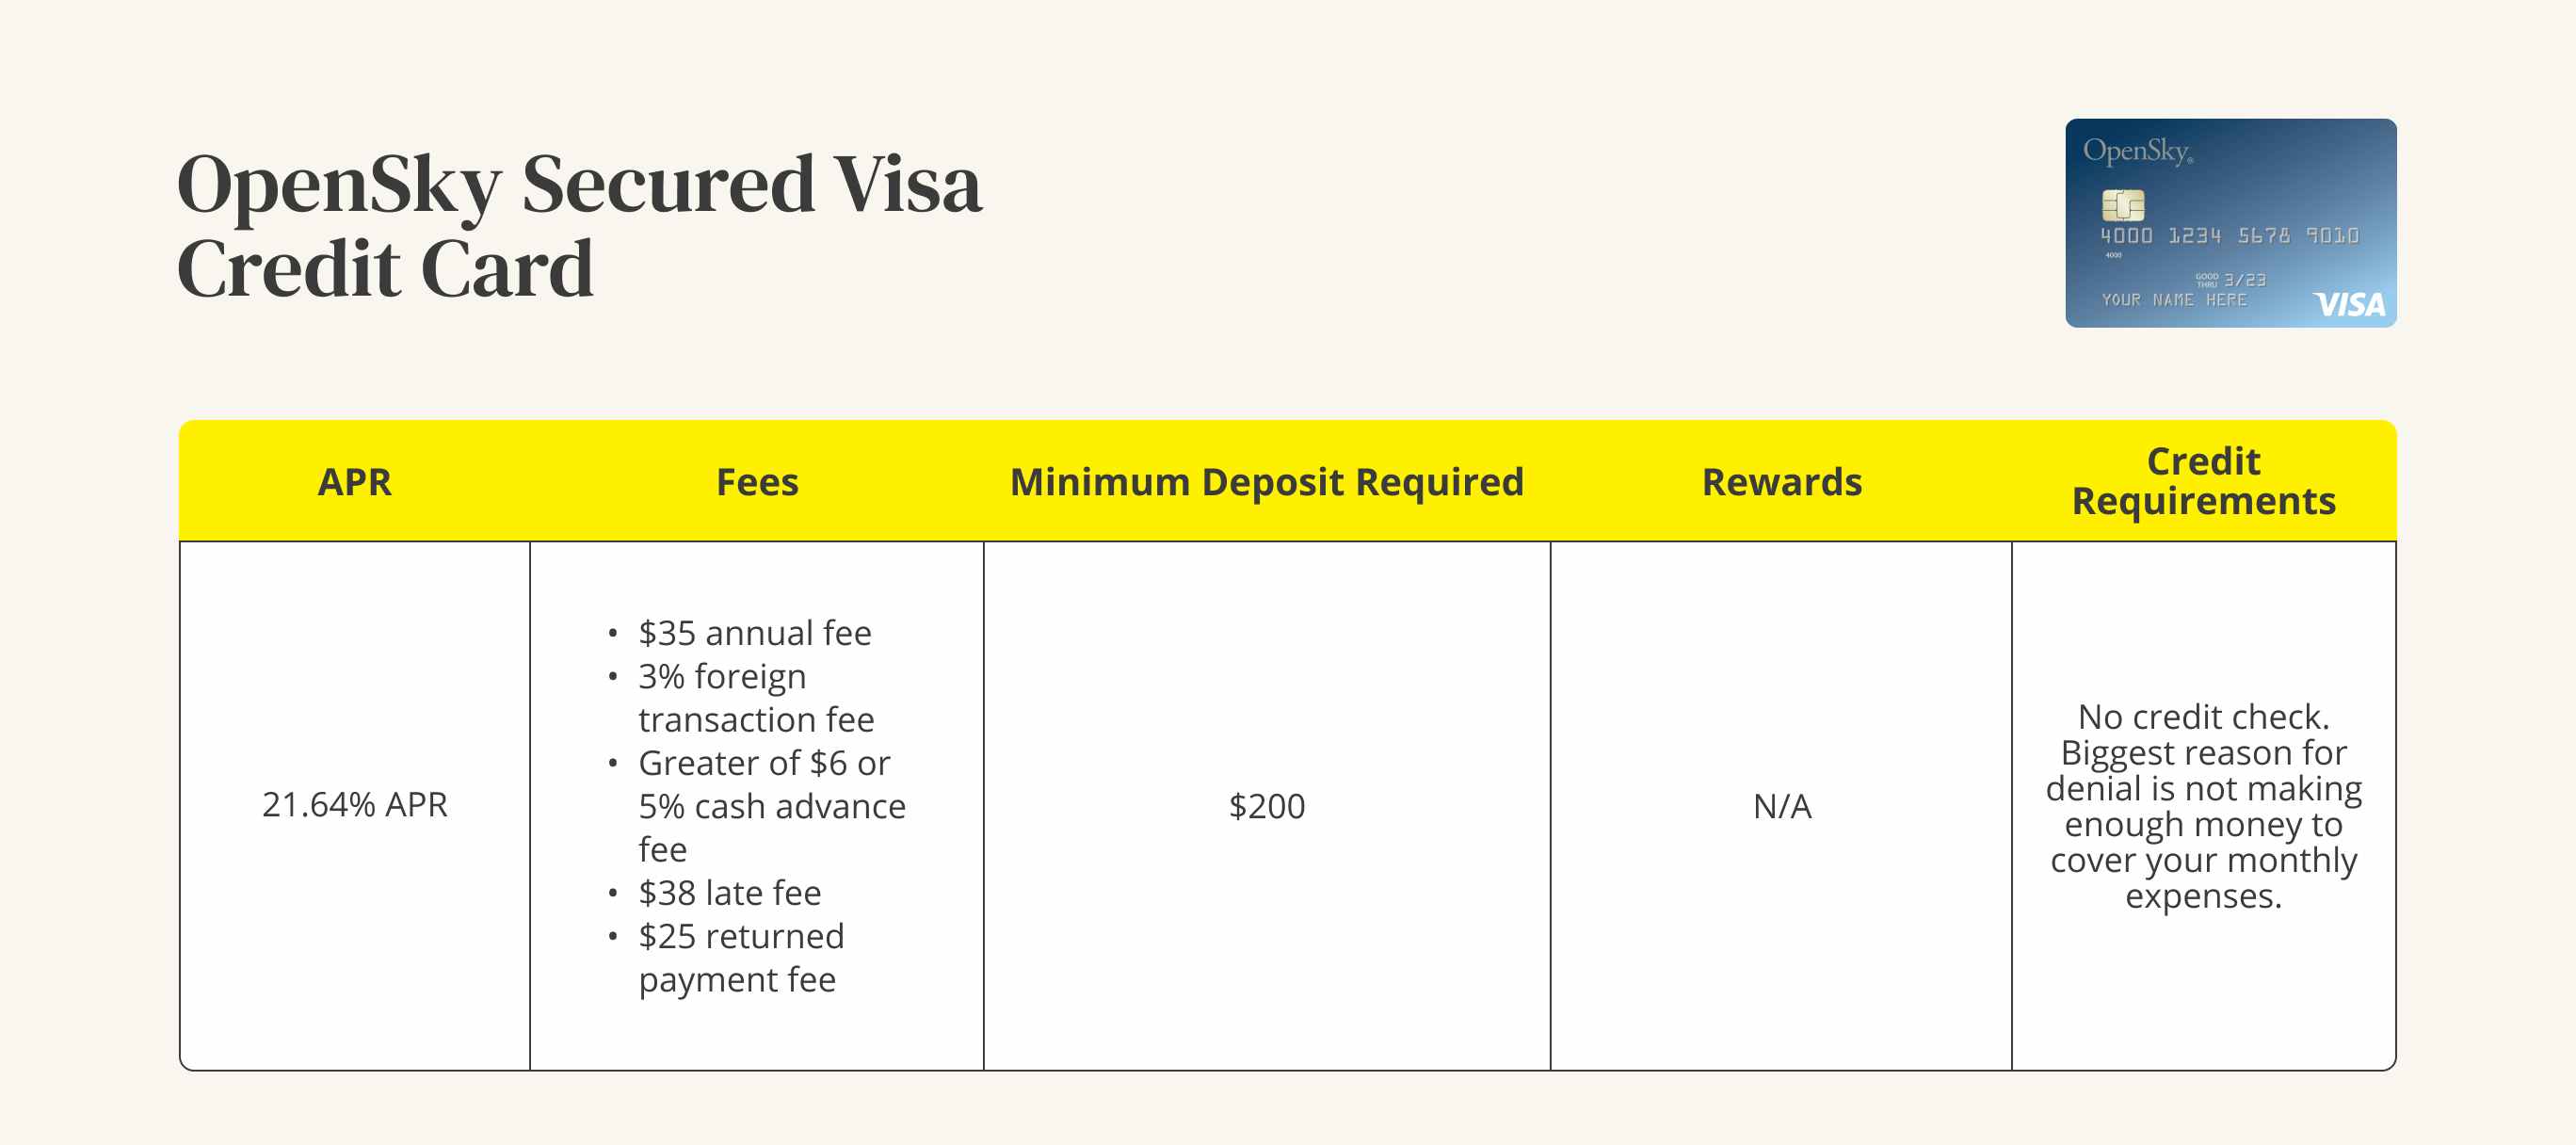 A graphic showing the APR, fees, minimum deposit, rewards, and credit requirements for a OpenSky Secured credit card